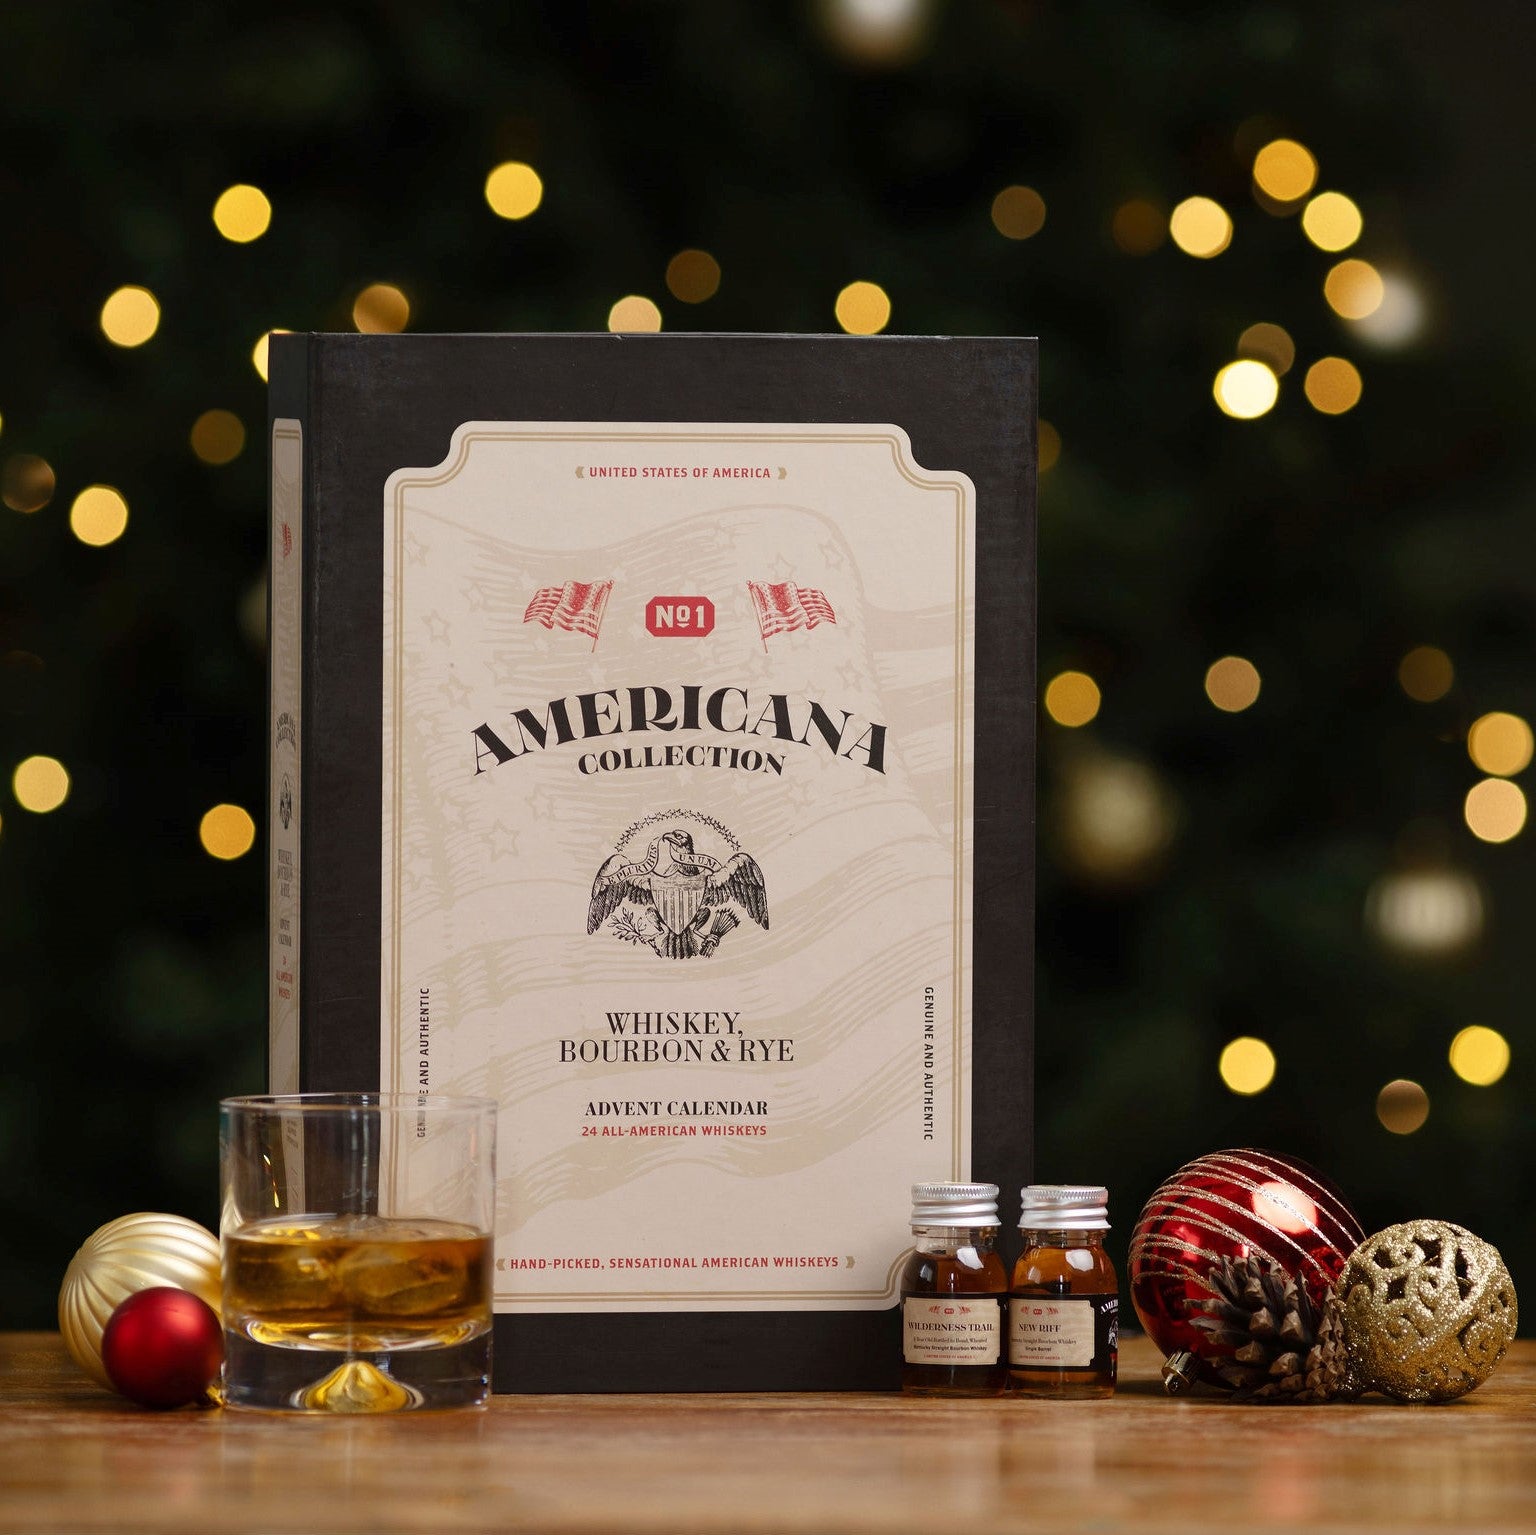 Buy The Americana Whiskey Collection Advent Calendar Online